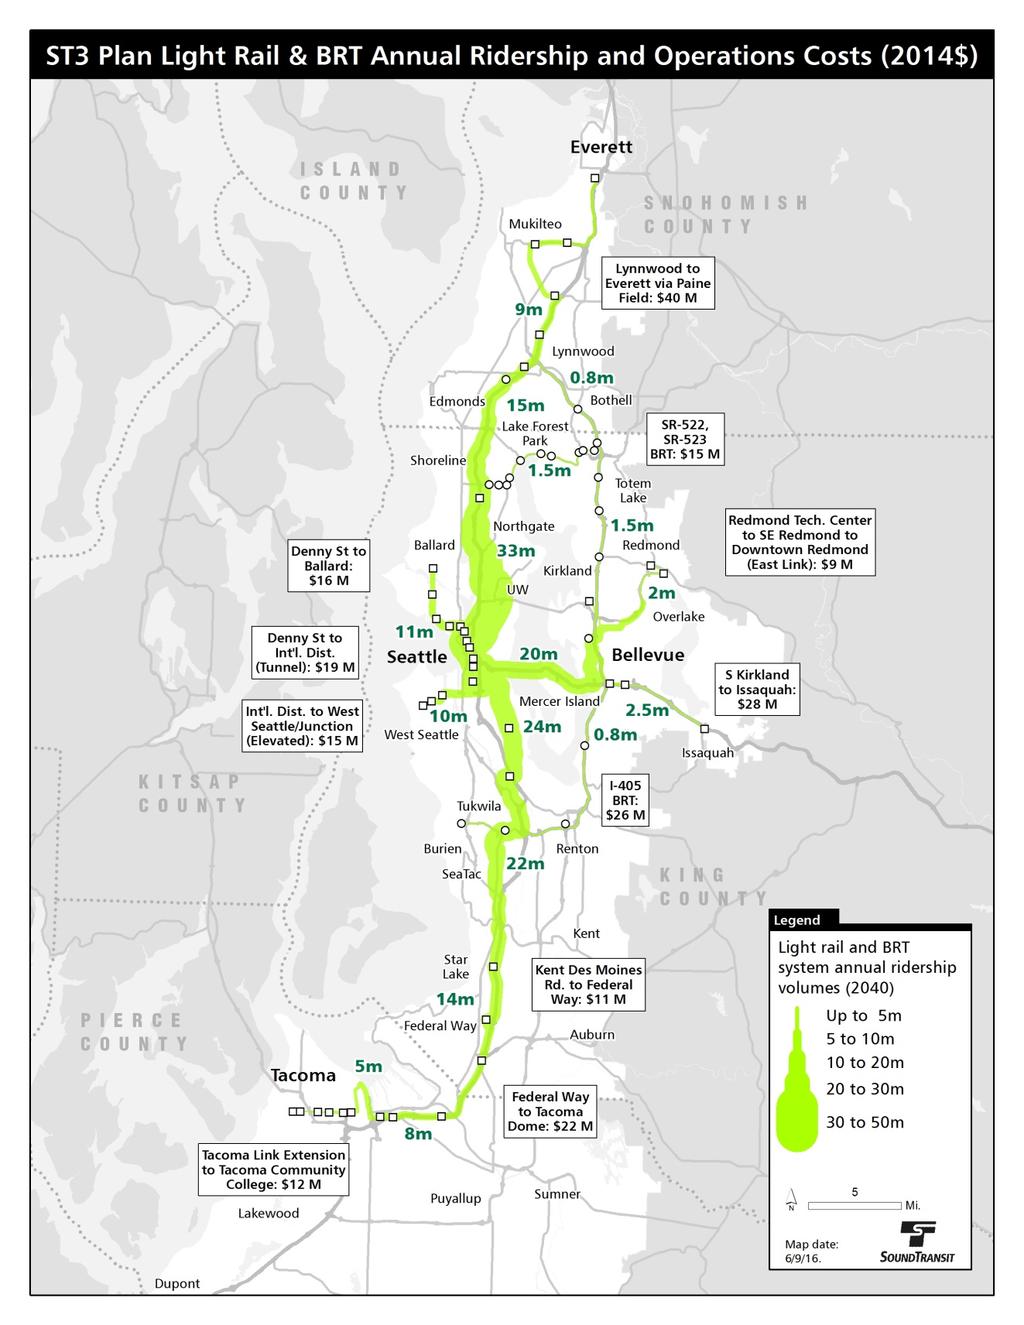 Operating costs and ridership on each ST3 light rail extension This map illustrates the annual transit ridership volumes in 2040 on each of the seven light rail extensions and the two BRT lines T